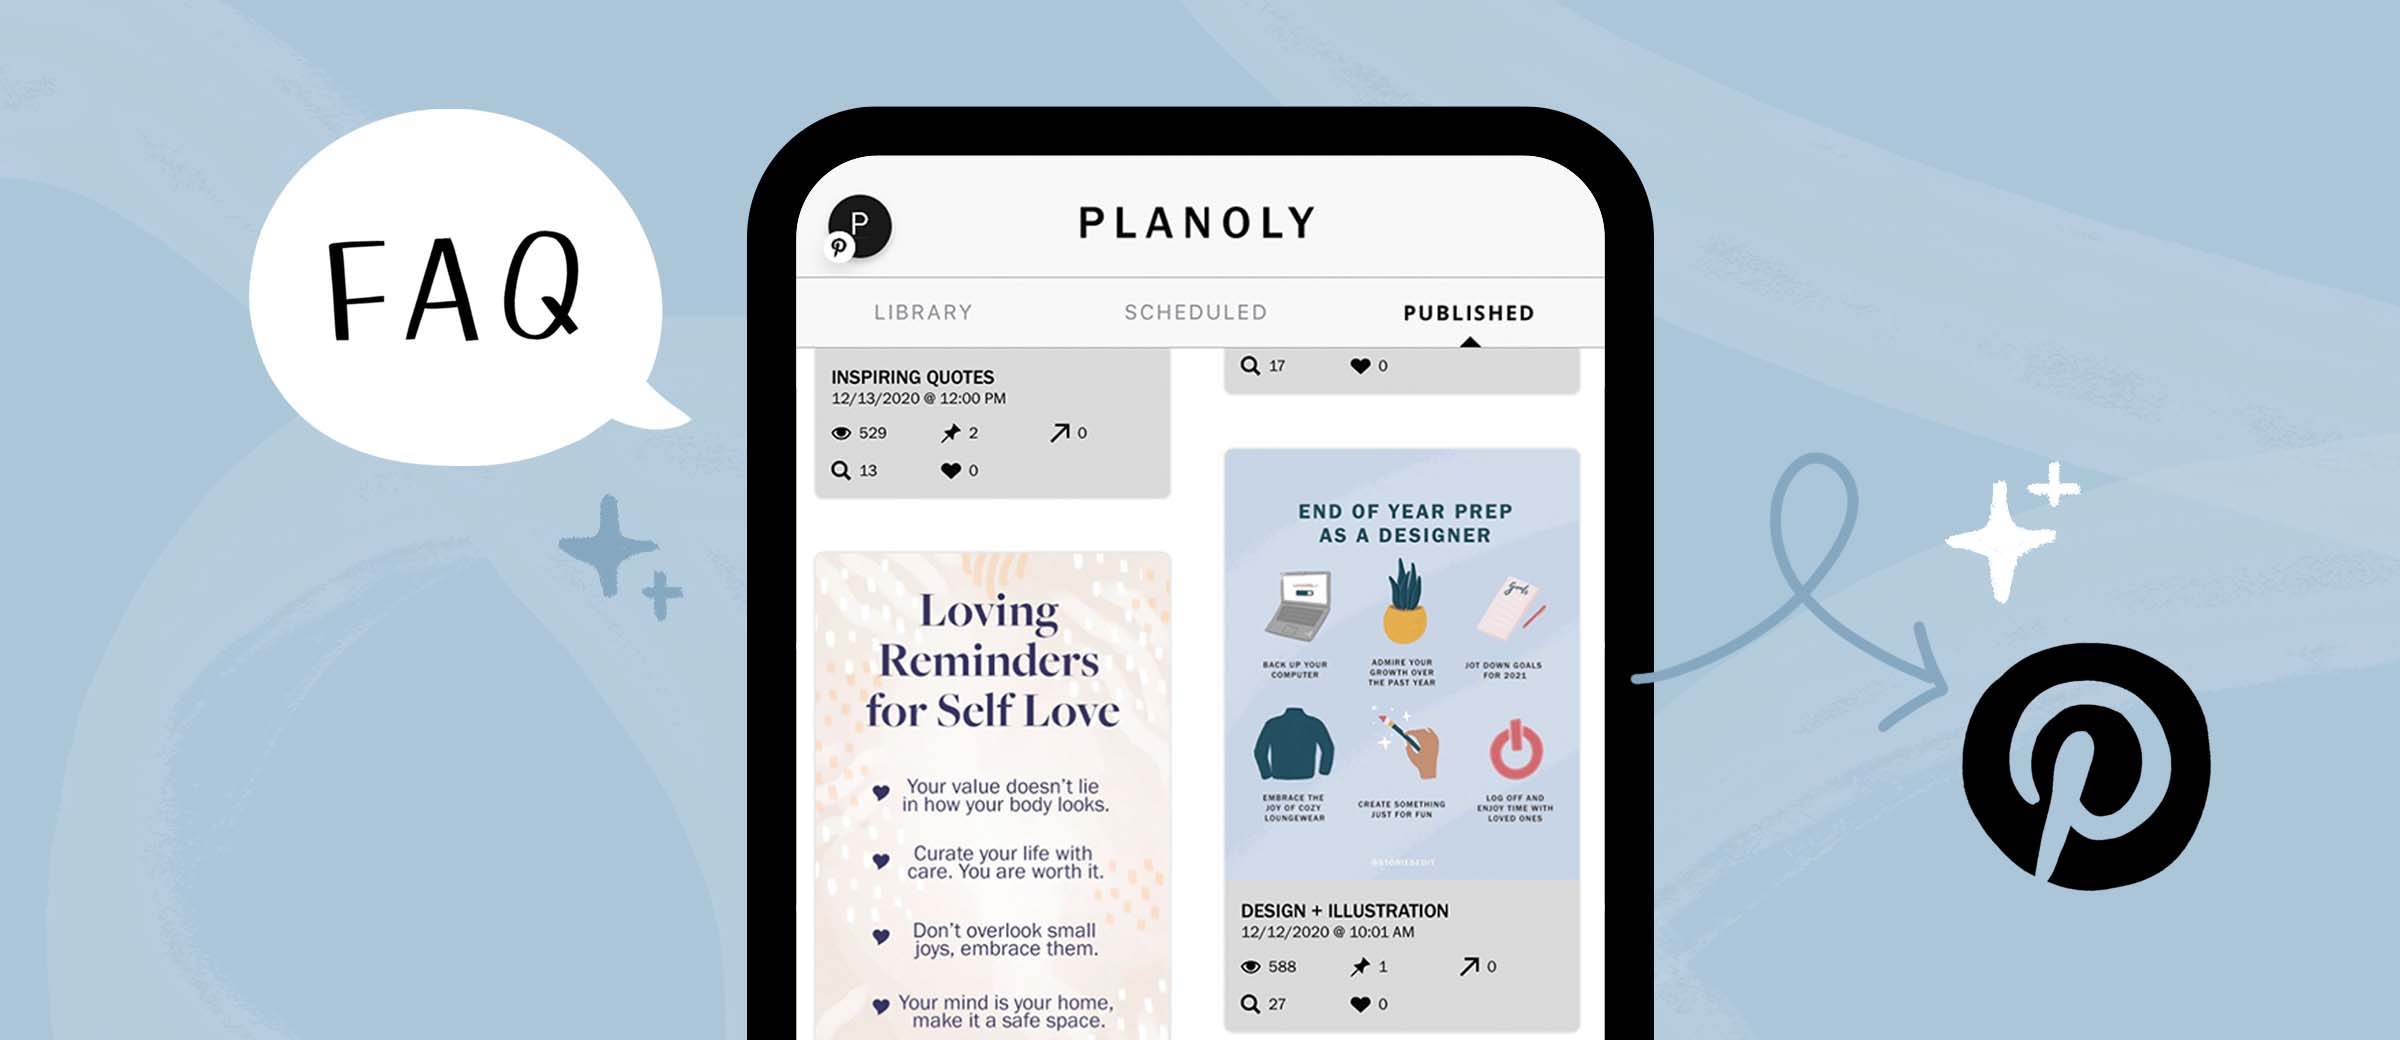 Frequently Asked Questions: PLANOLY Pin Planner